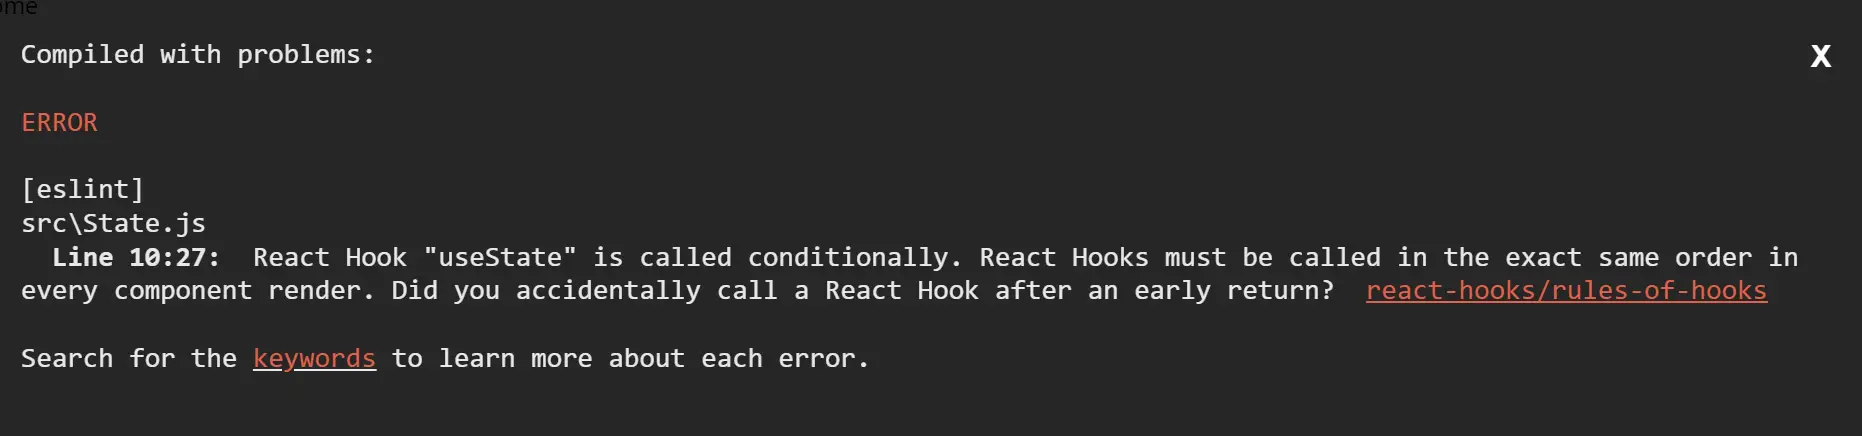 React Hook "useState" is called conditionally. React Hooks must be called in the exact same order in every component render. Did you accidentally call a React Hook after an early return?